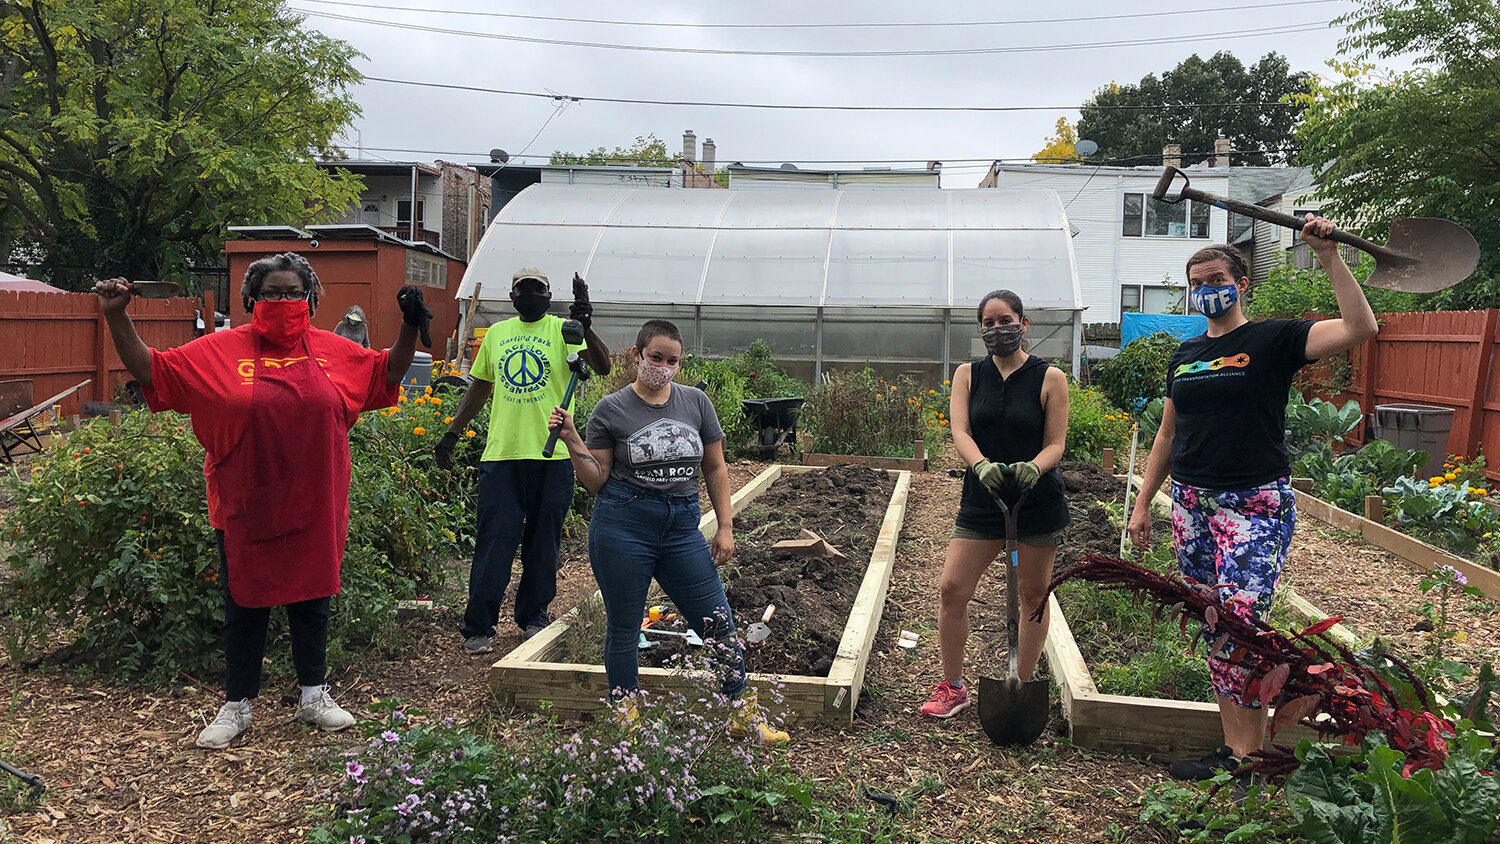  With volunteer support as well as assistance from the MAAFA Redemption Project of New Mt. Pilgrim Church, garden leaders Sam and Angela Taylor updated the 10-year-old raised beds at the Fulton Street Flower and Vegetable Garden. Photo courtesy of Ga